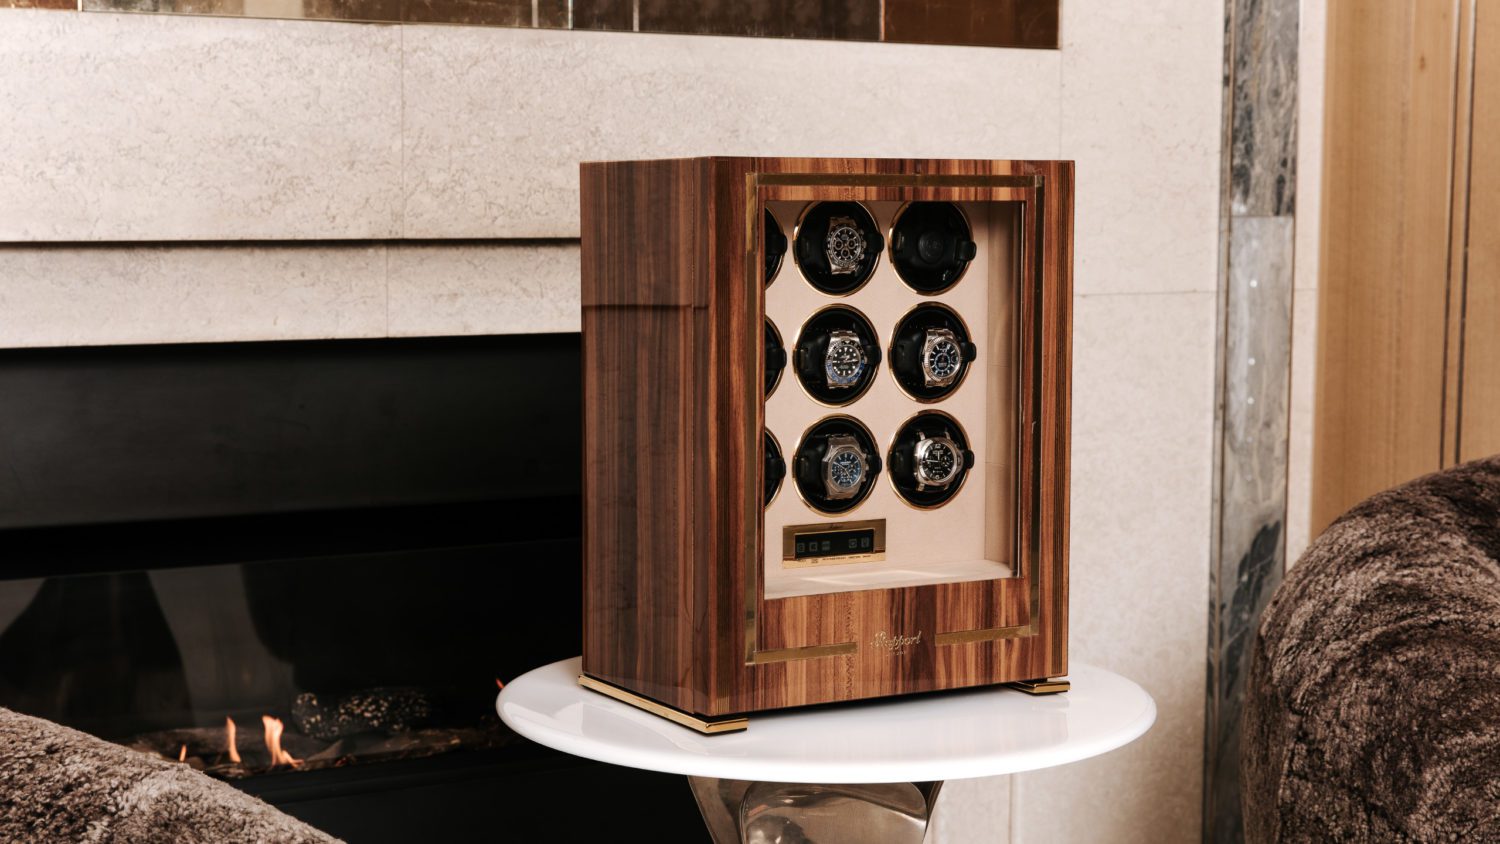 Crafted from exquisite materials these winders exemplify the brand's commitment to excellence.